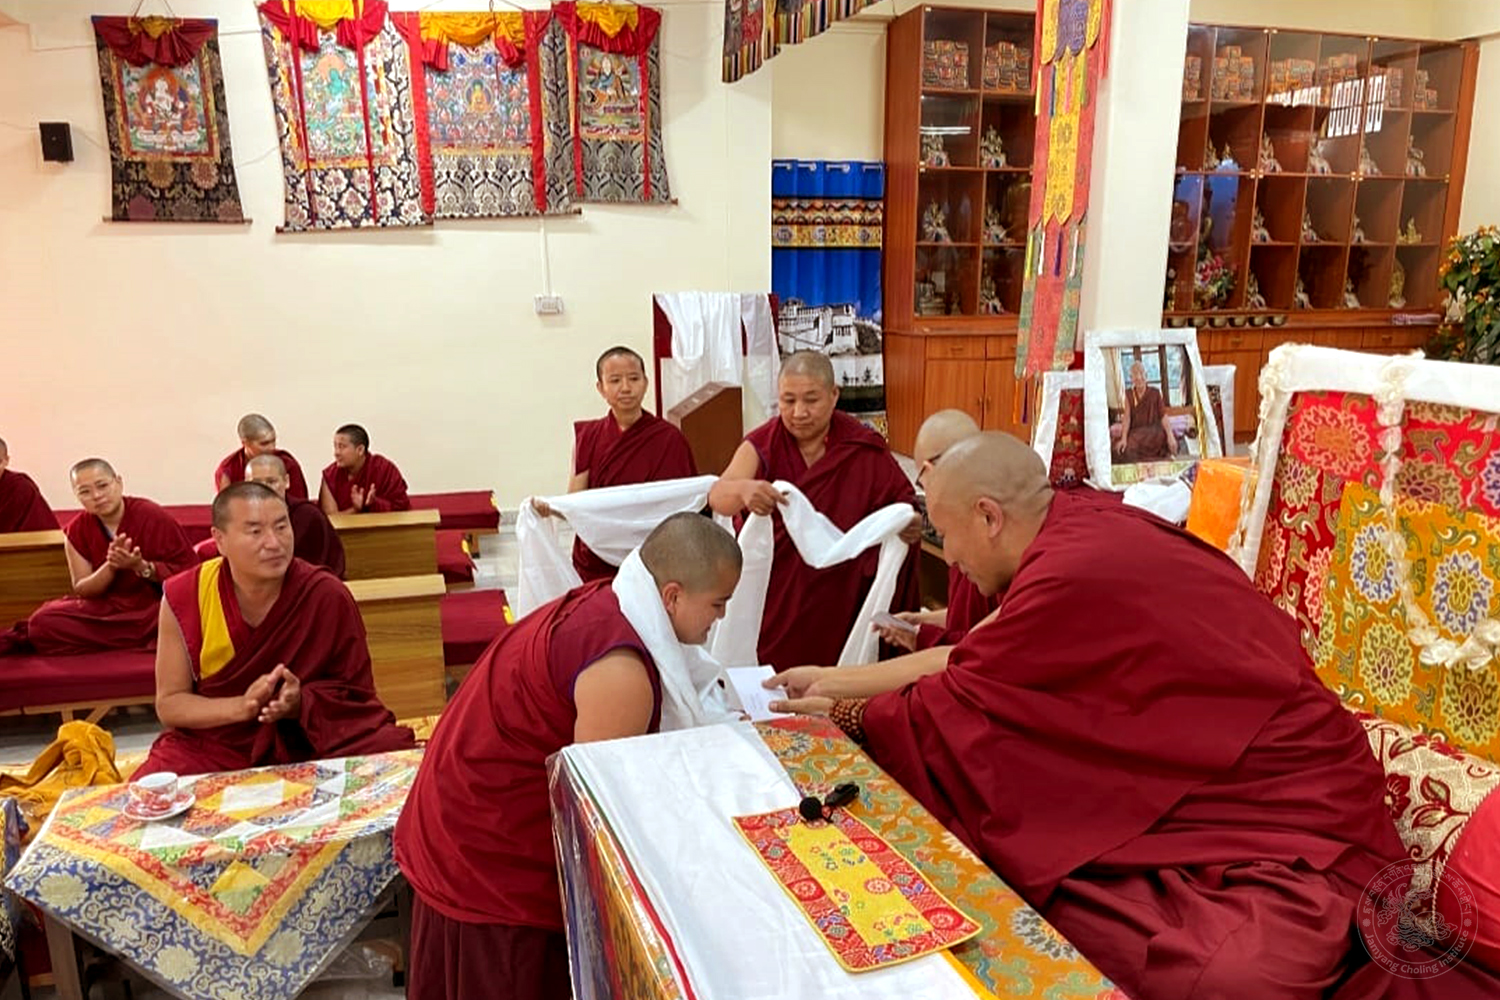 Prize and khatak being distributed by Abbot Geshe Tsering Nyerna La